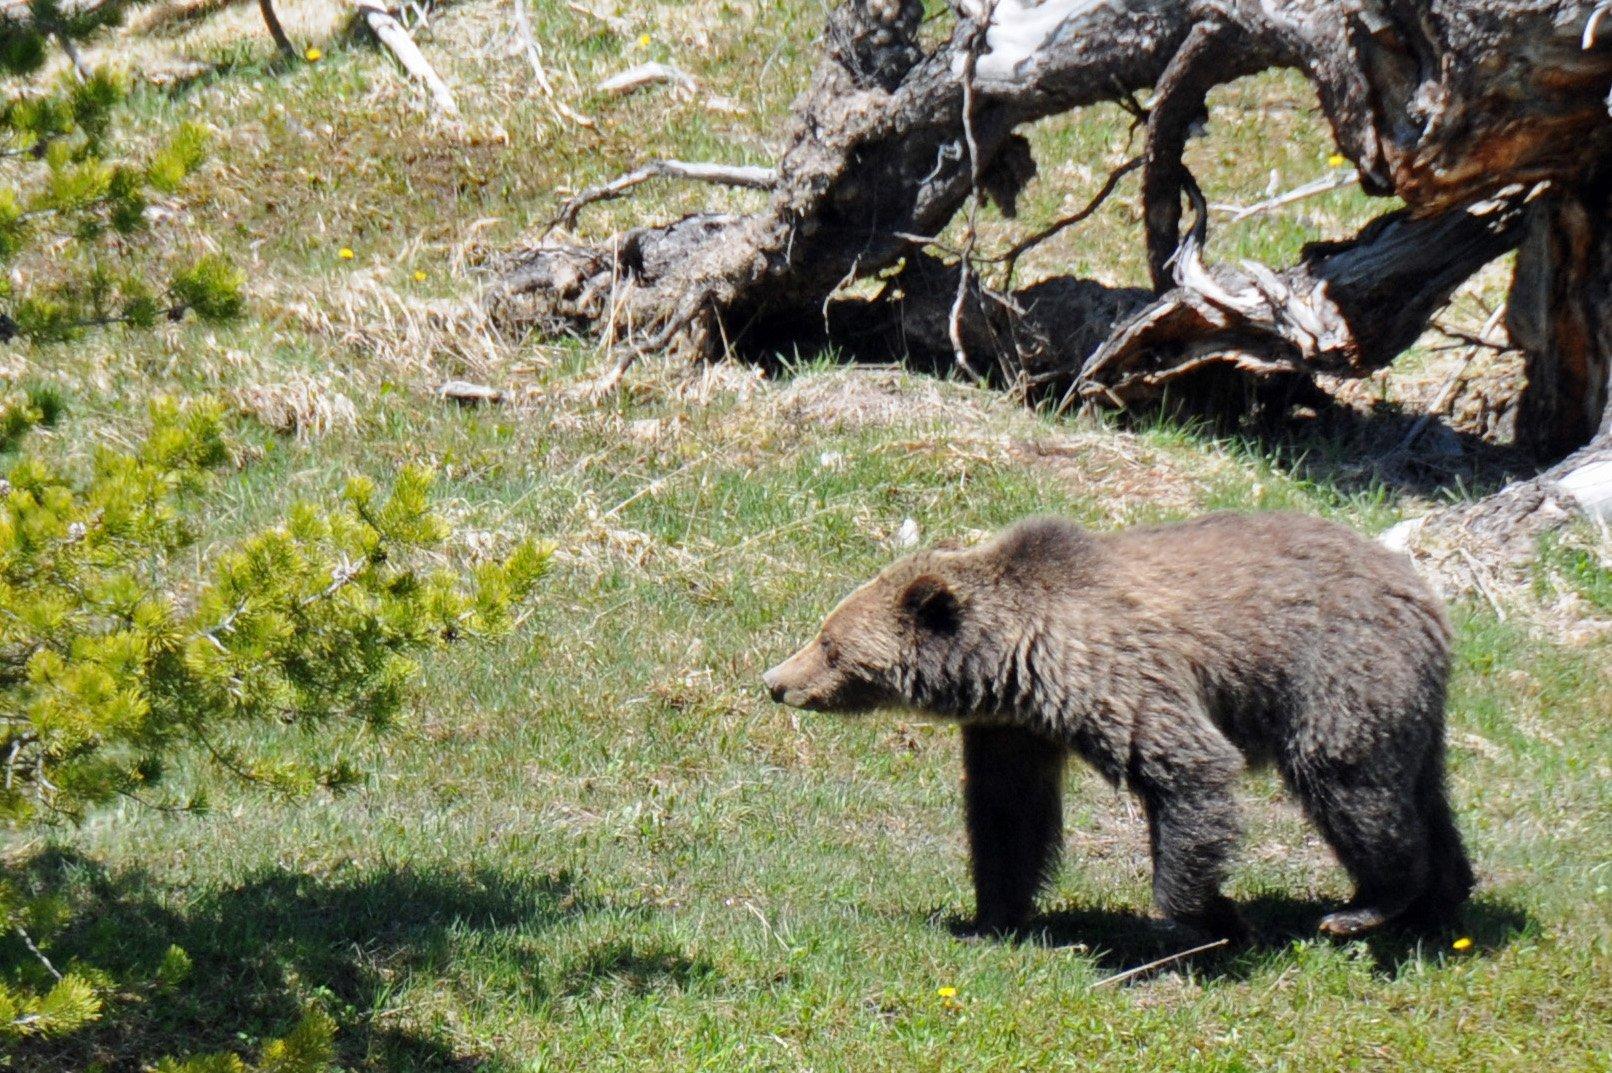 A runner and a young grizzly bear collided on a trail in Glacier National Park. (Image by Stephanie Mallory)